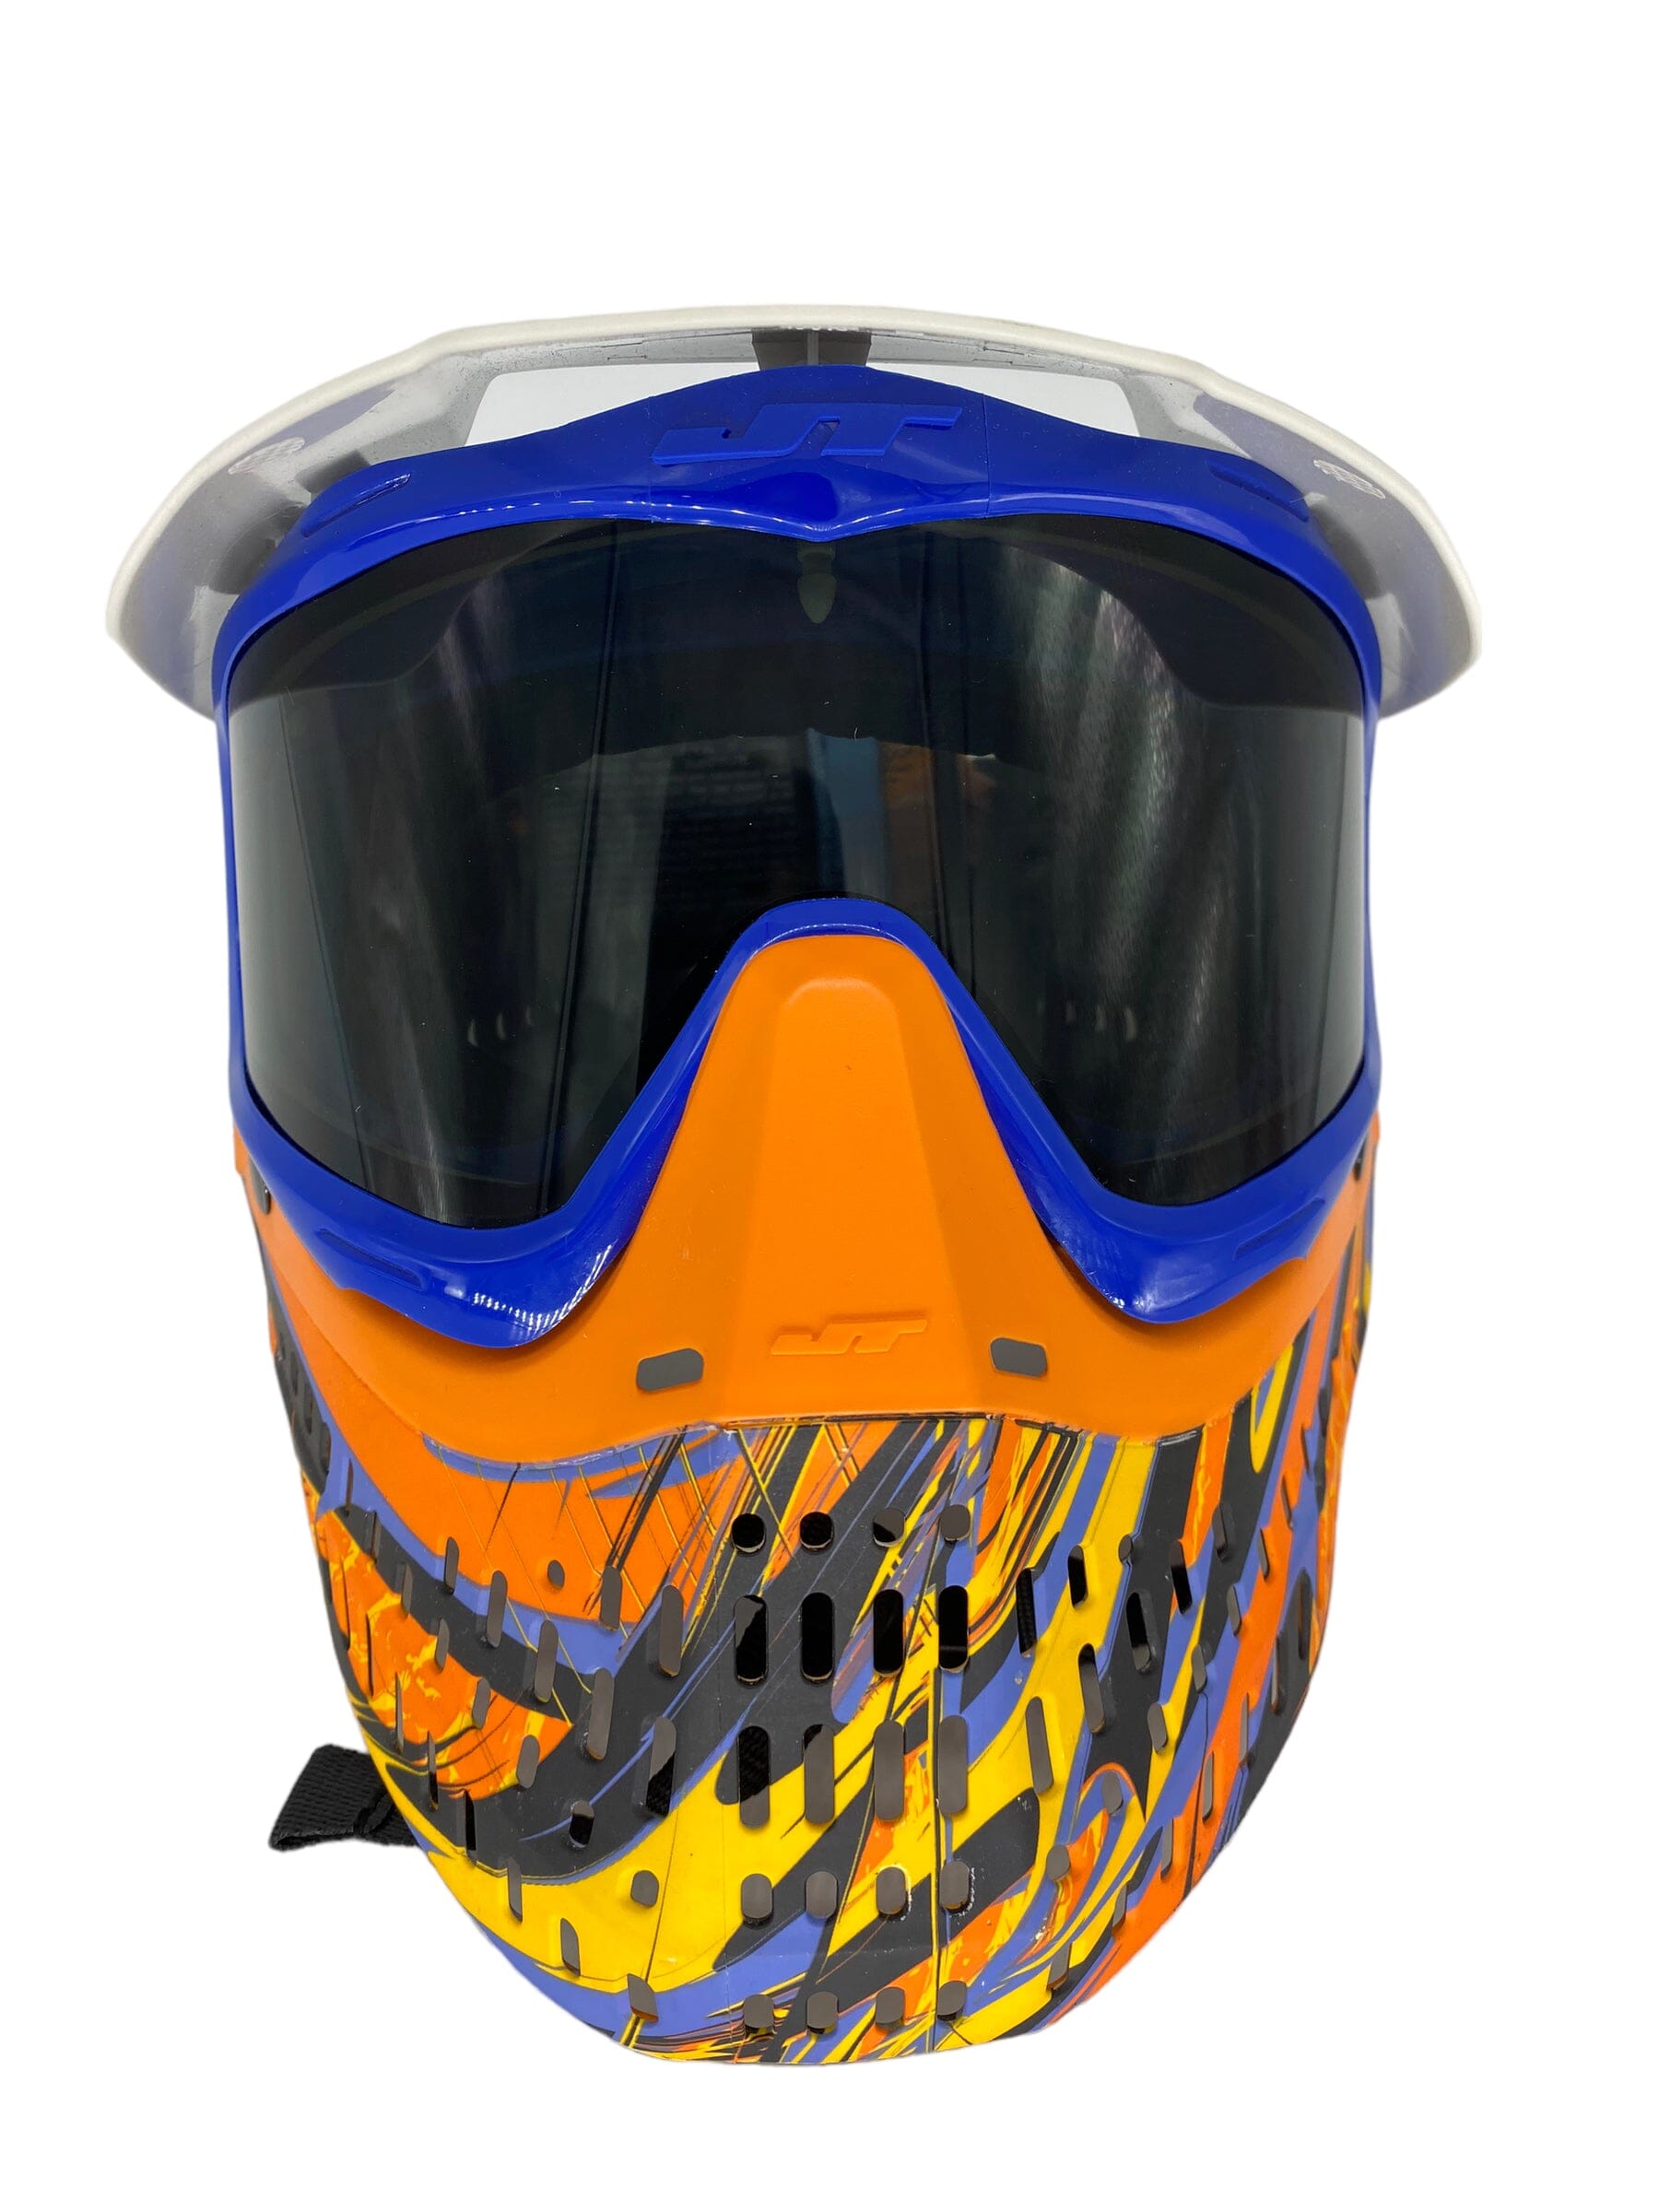 Used JT ProFlex Paintball Mask - Blaster Orange w/ Mask Case Paintball Gun from CPXBrosPaintball Buy/Sell/Trade Paintball Markers, Paintball Hoppers, Paintball Masks, and Hormesis Headbands